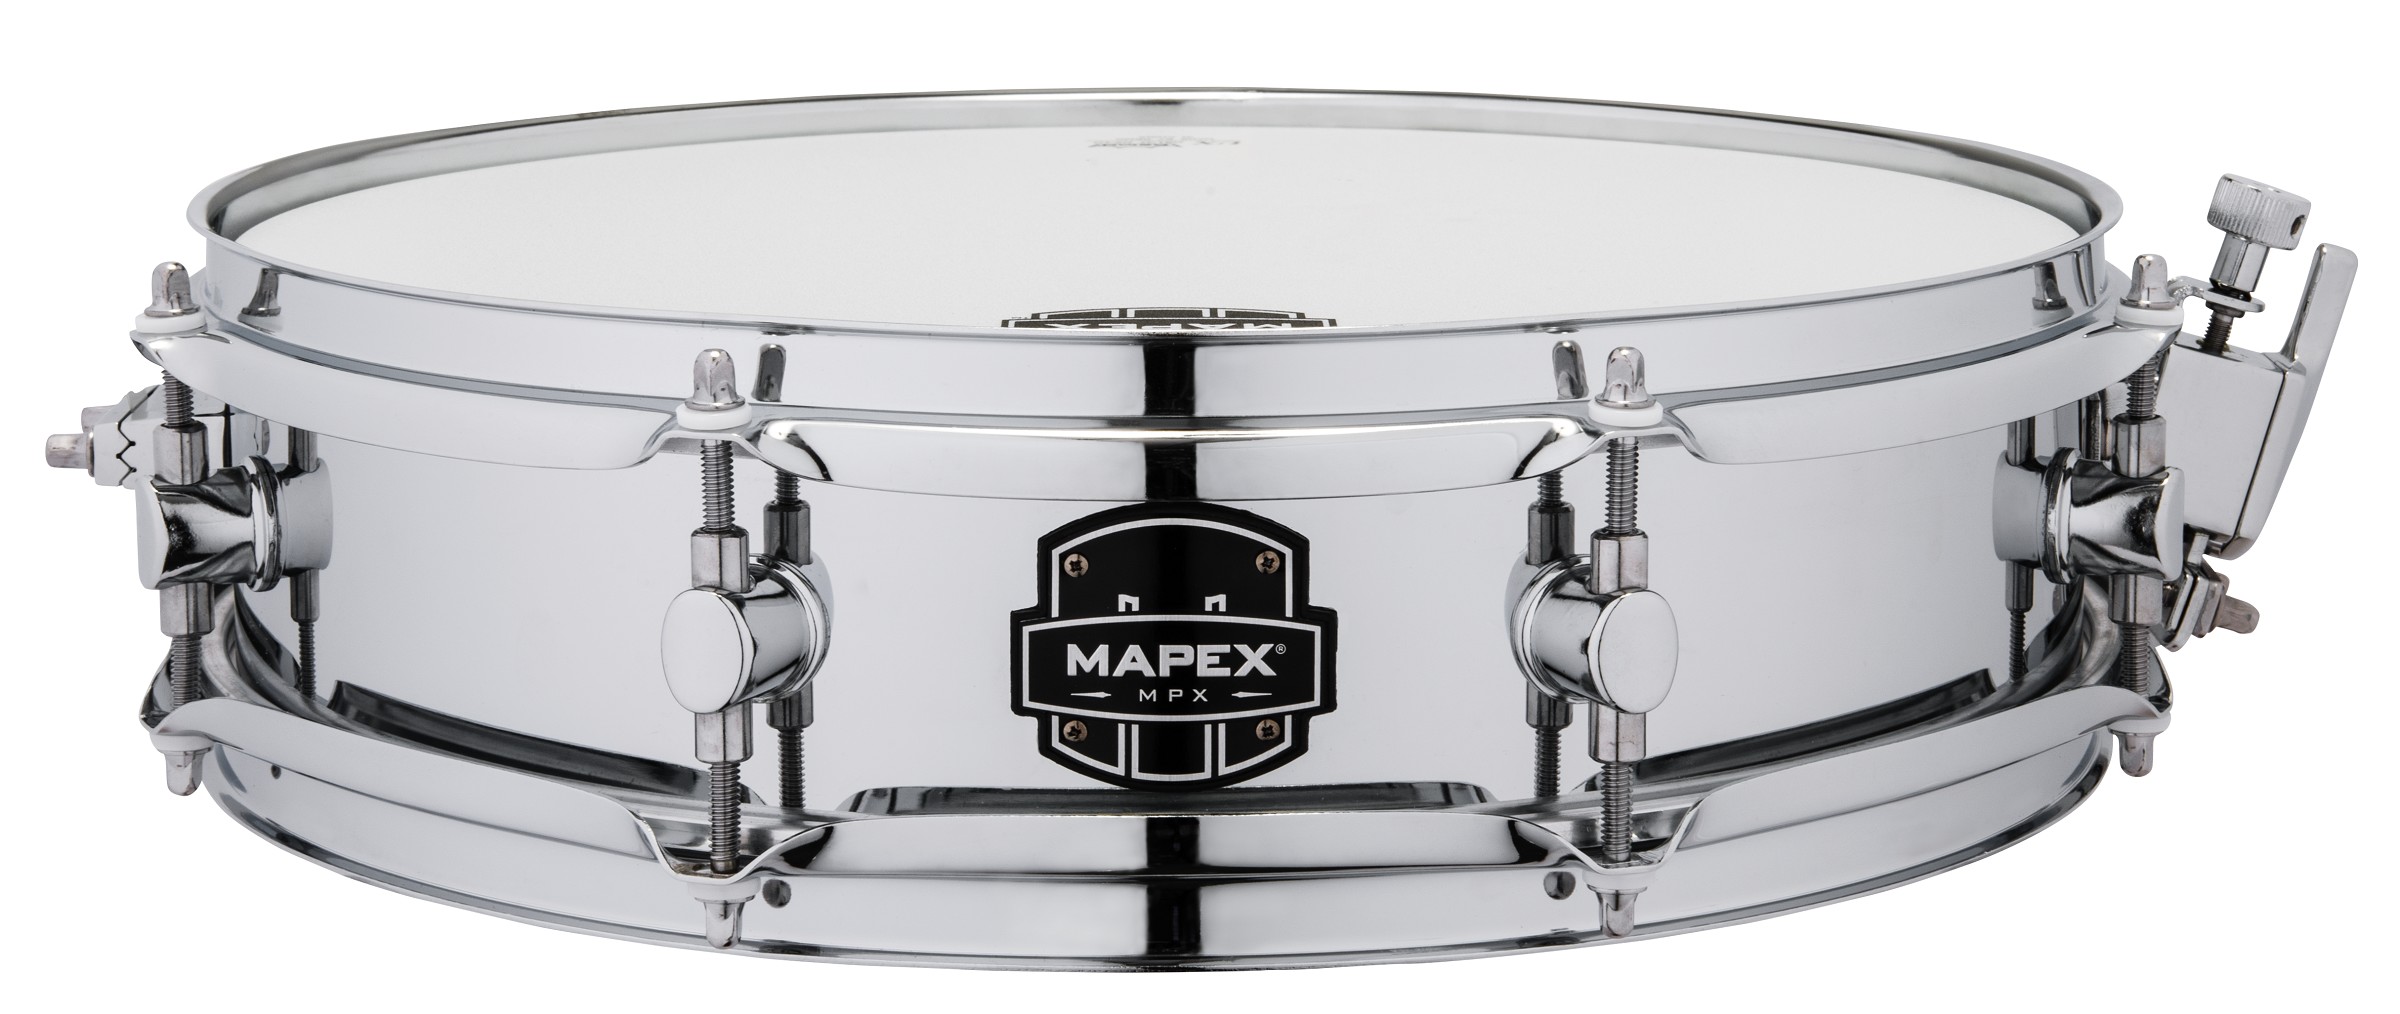 Mapex MPX Snare 14"x3,5" Steel Chrome Hardware